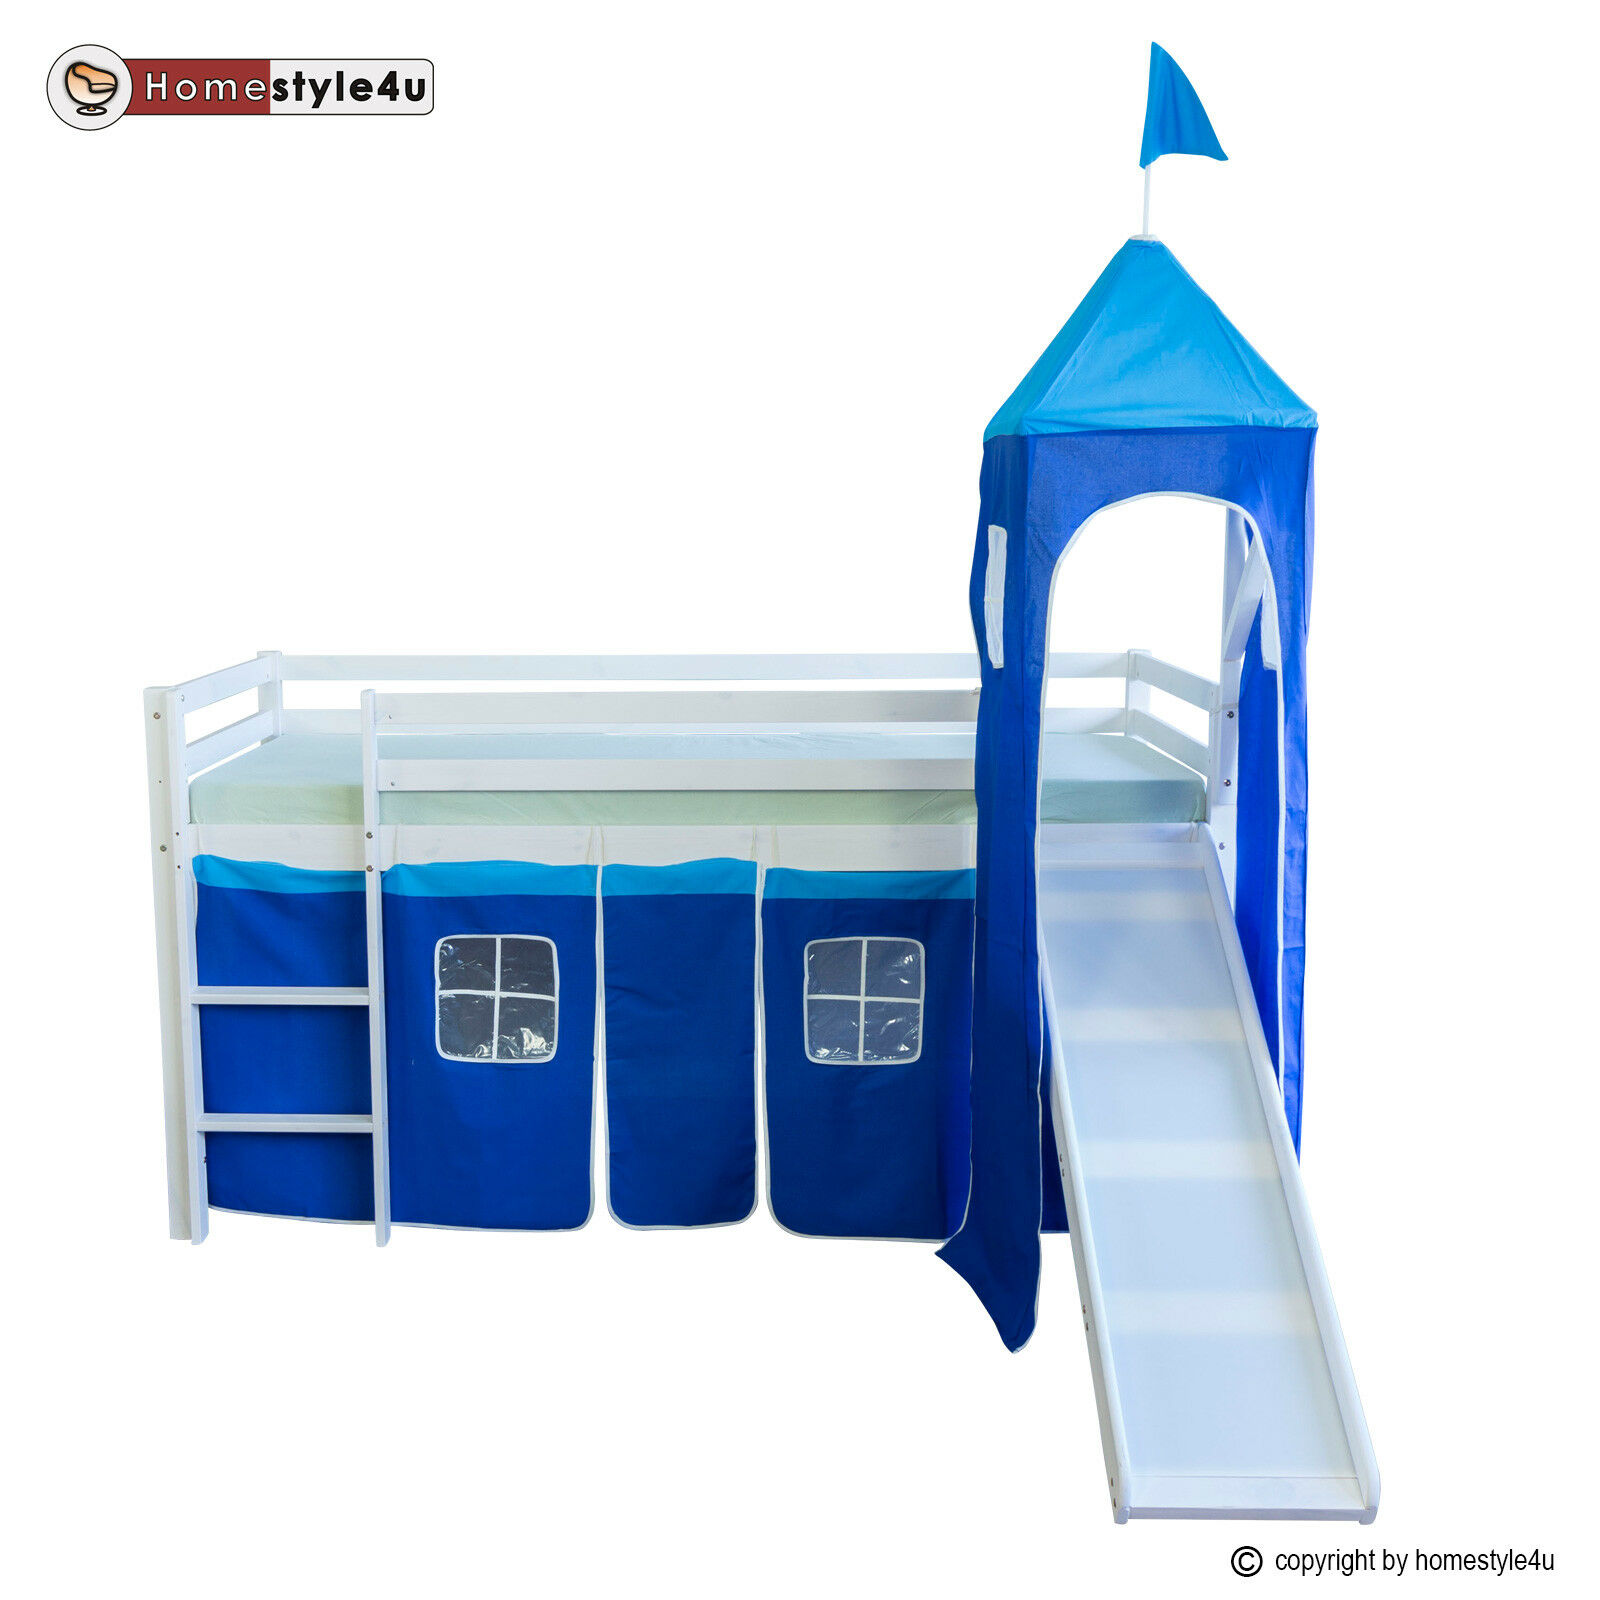 Loftbed Childrenbed Slide Tower Solid Pine Curtain Blue 90x200